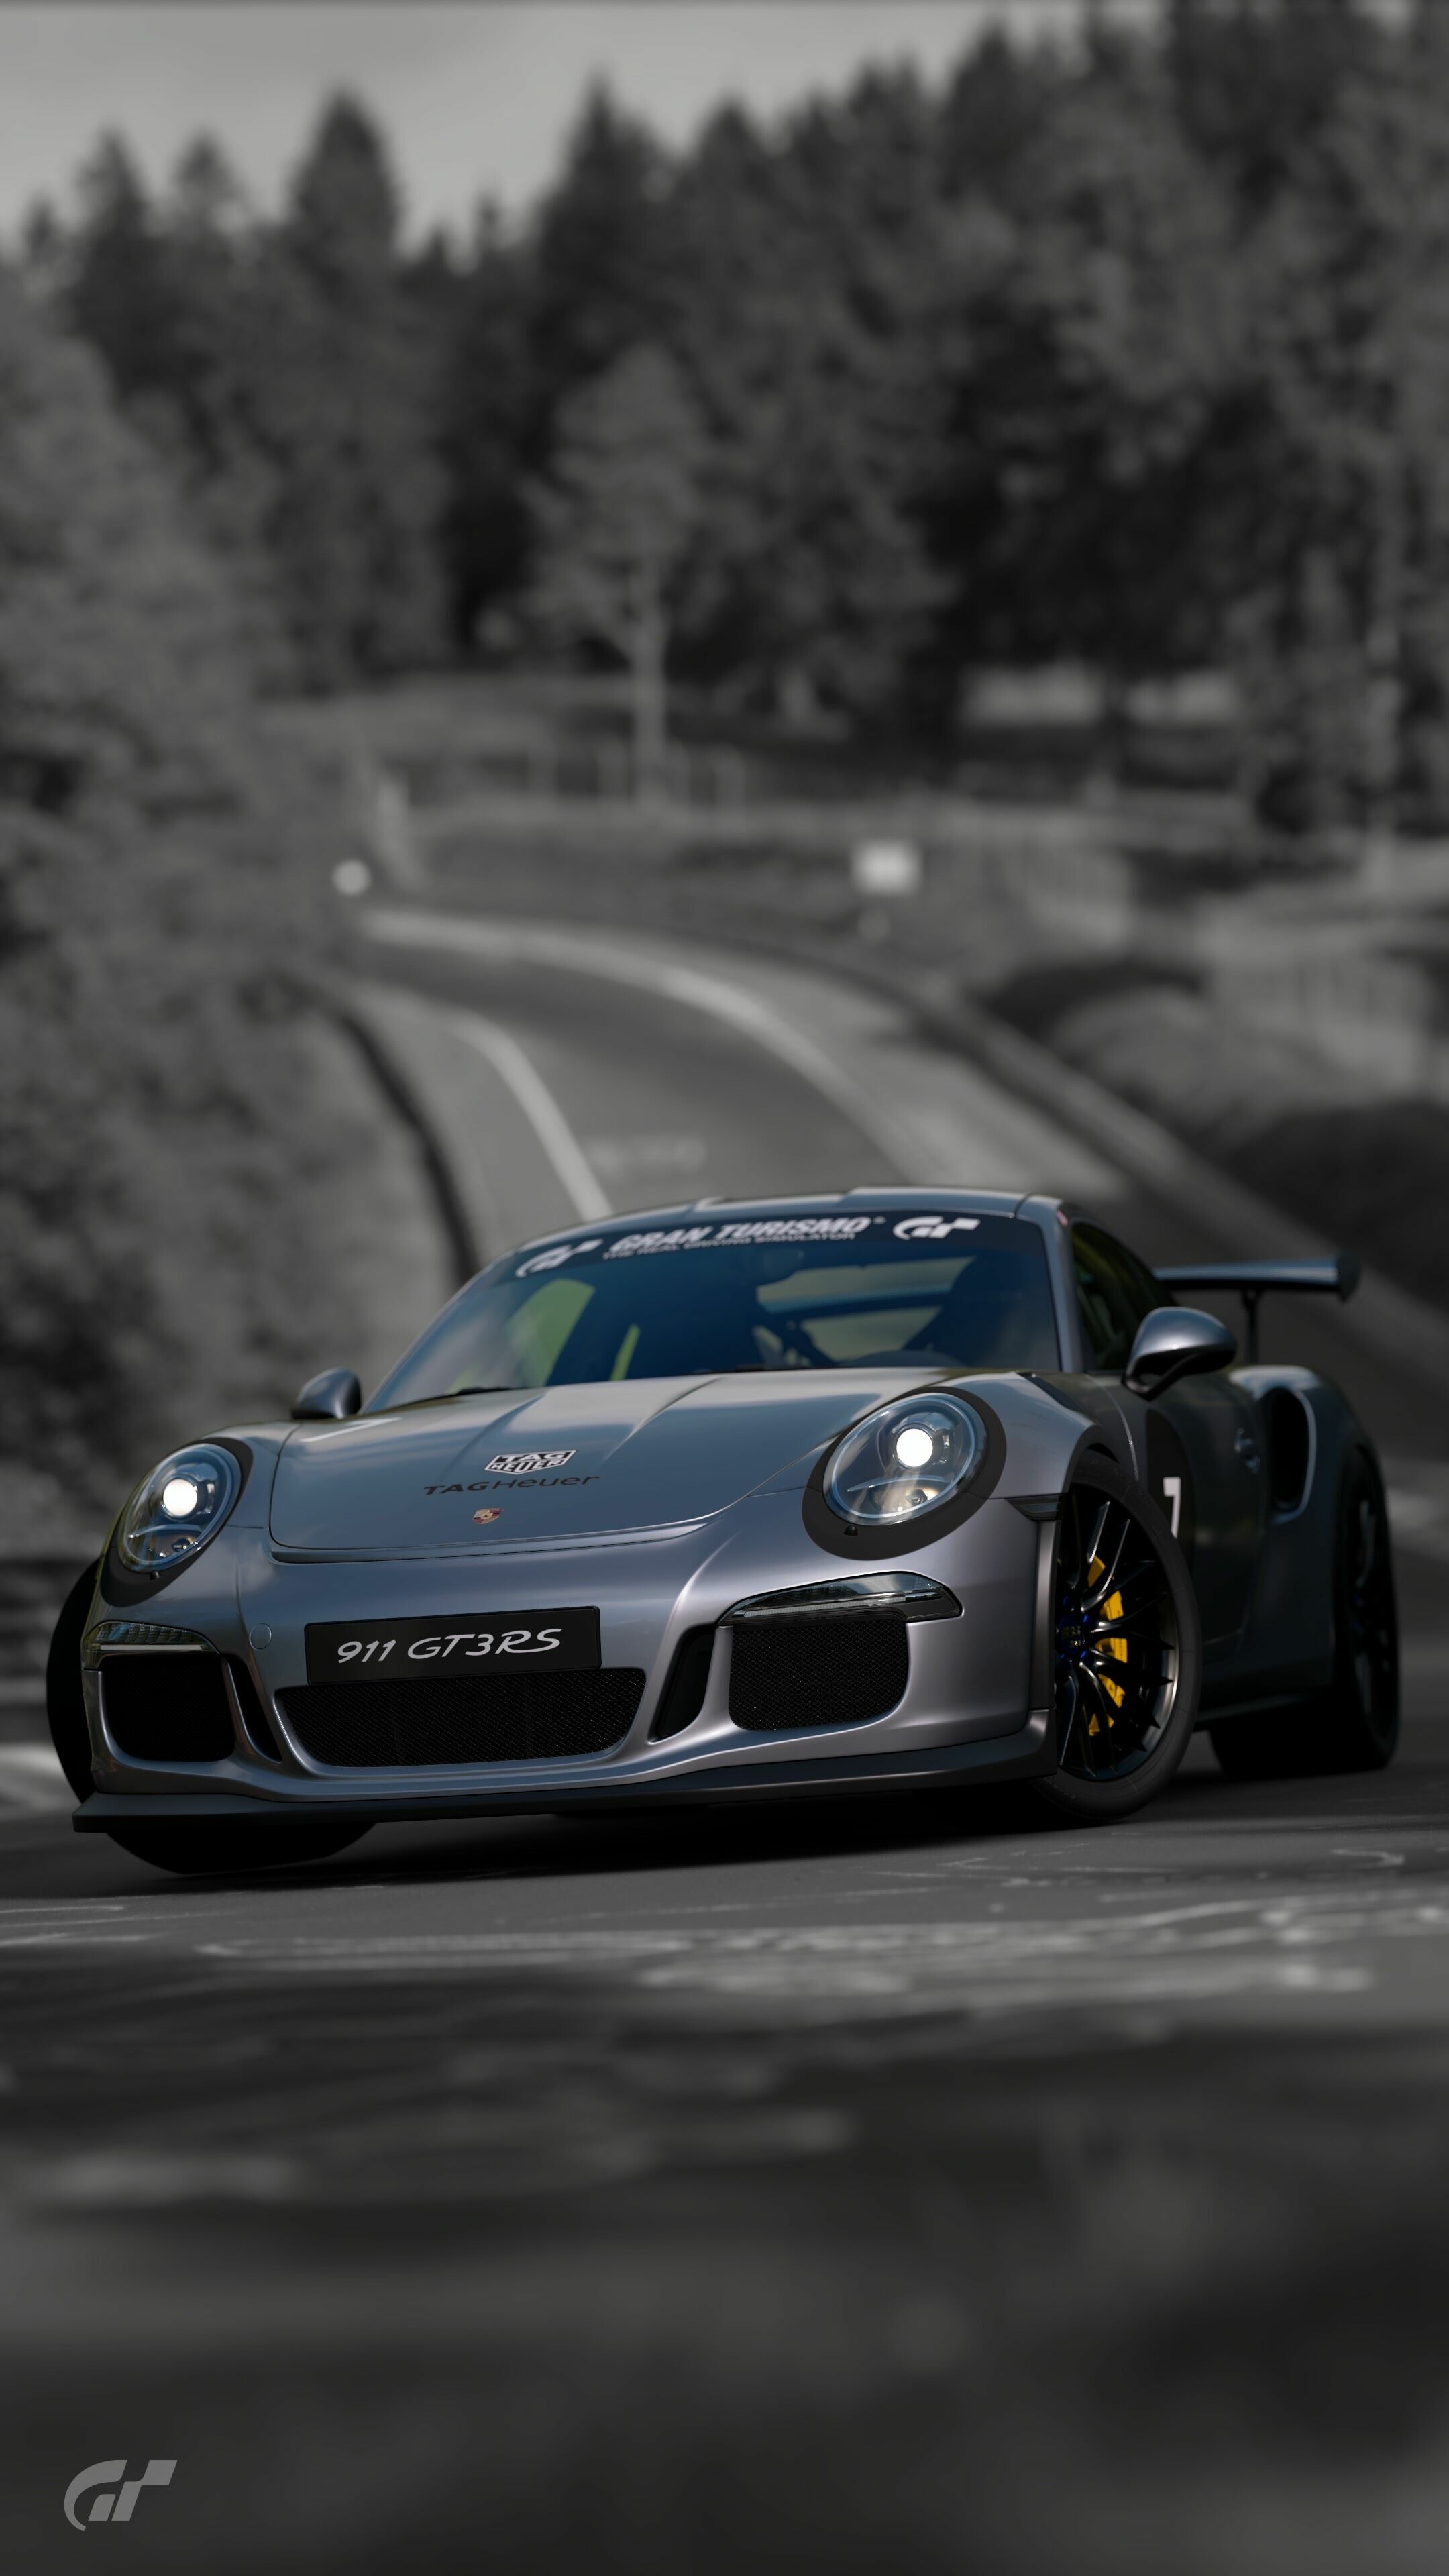 Porsche: GT3 RS, The most stunning road-legal supercar, with its upgraded aerodynamics and track-ready design. 2160x3840 4K Wallpaper.